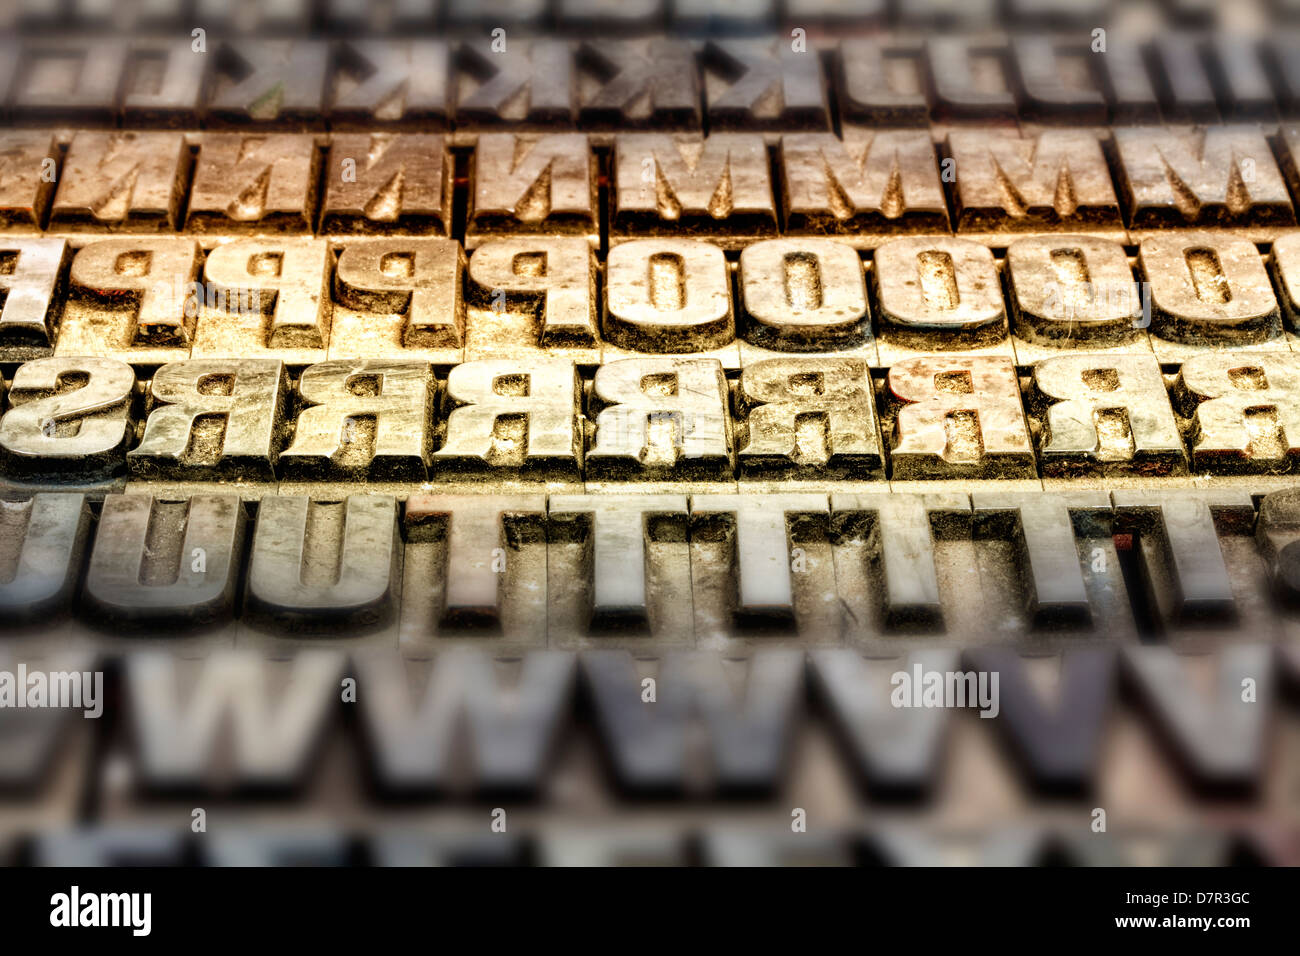 Metal printing setting, old letters made of lead for letterpress printing Stock Photo